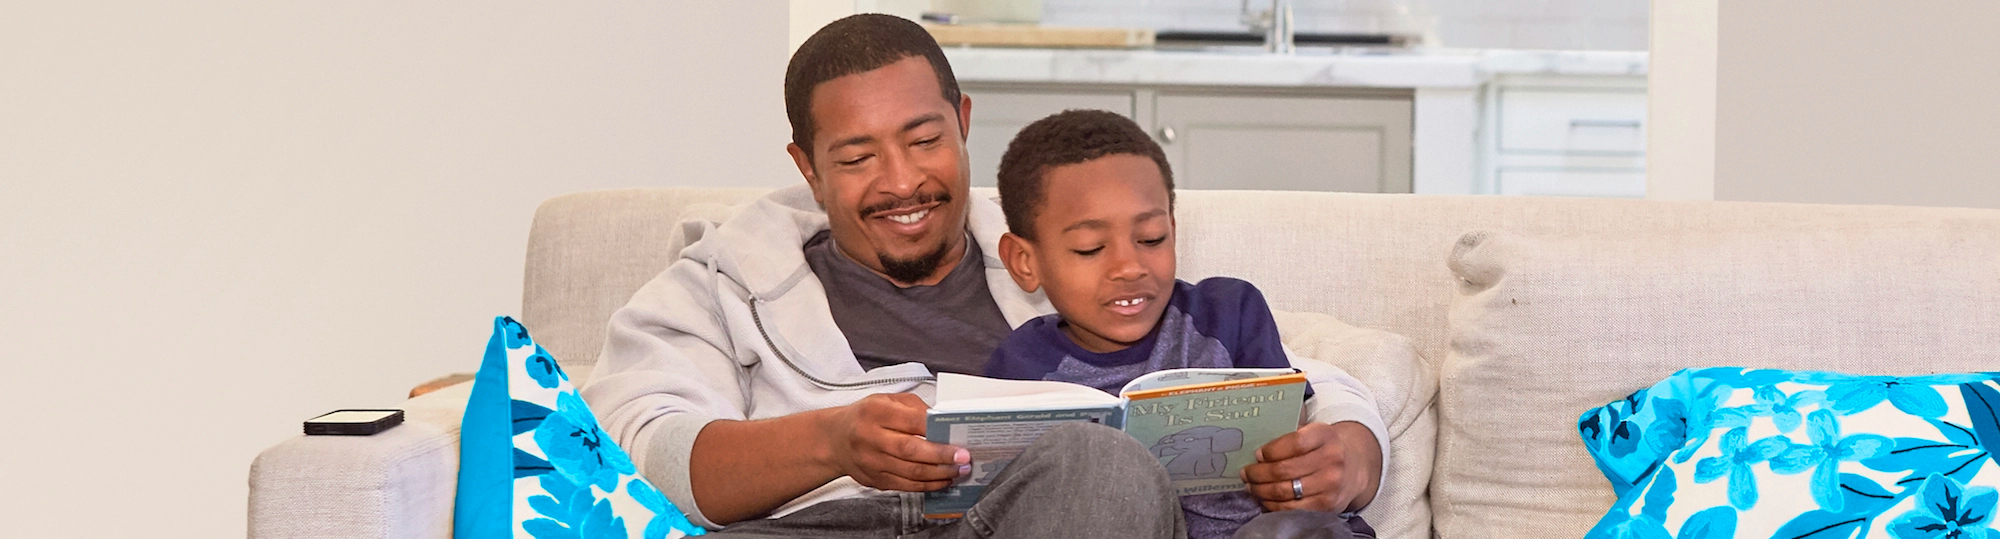 Father and son read book together on couch